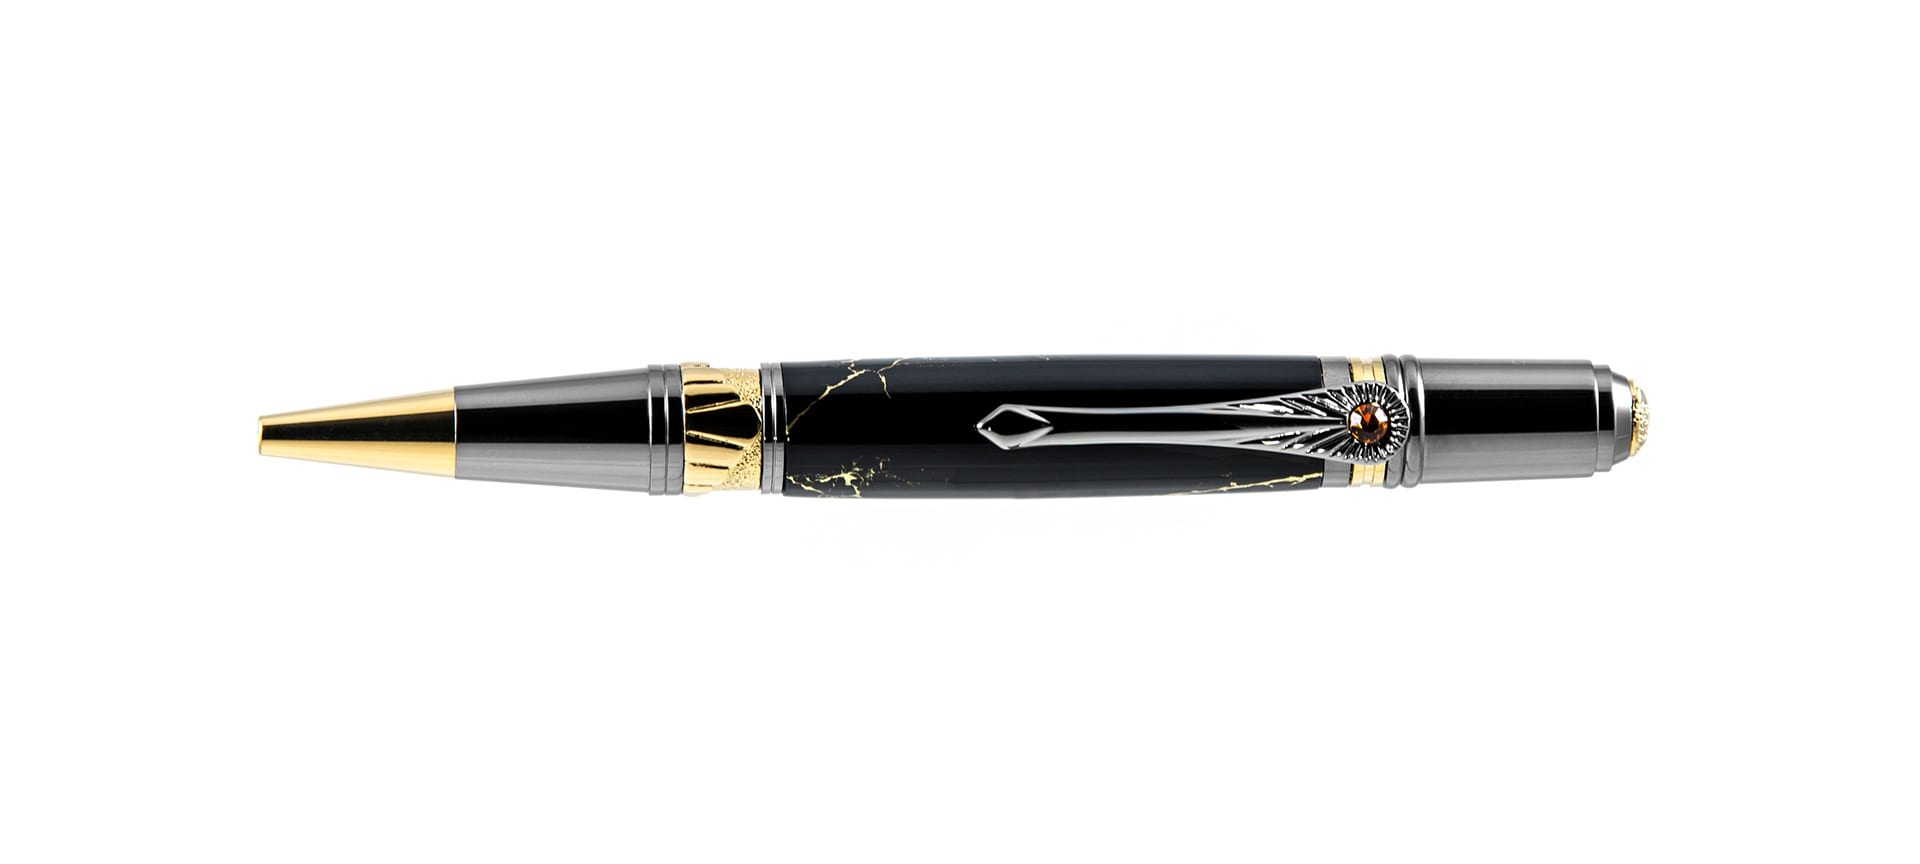 Art Deco pen made from handturned stone and resin combo.